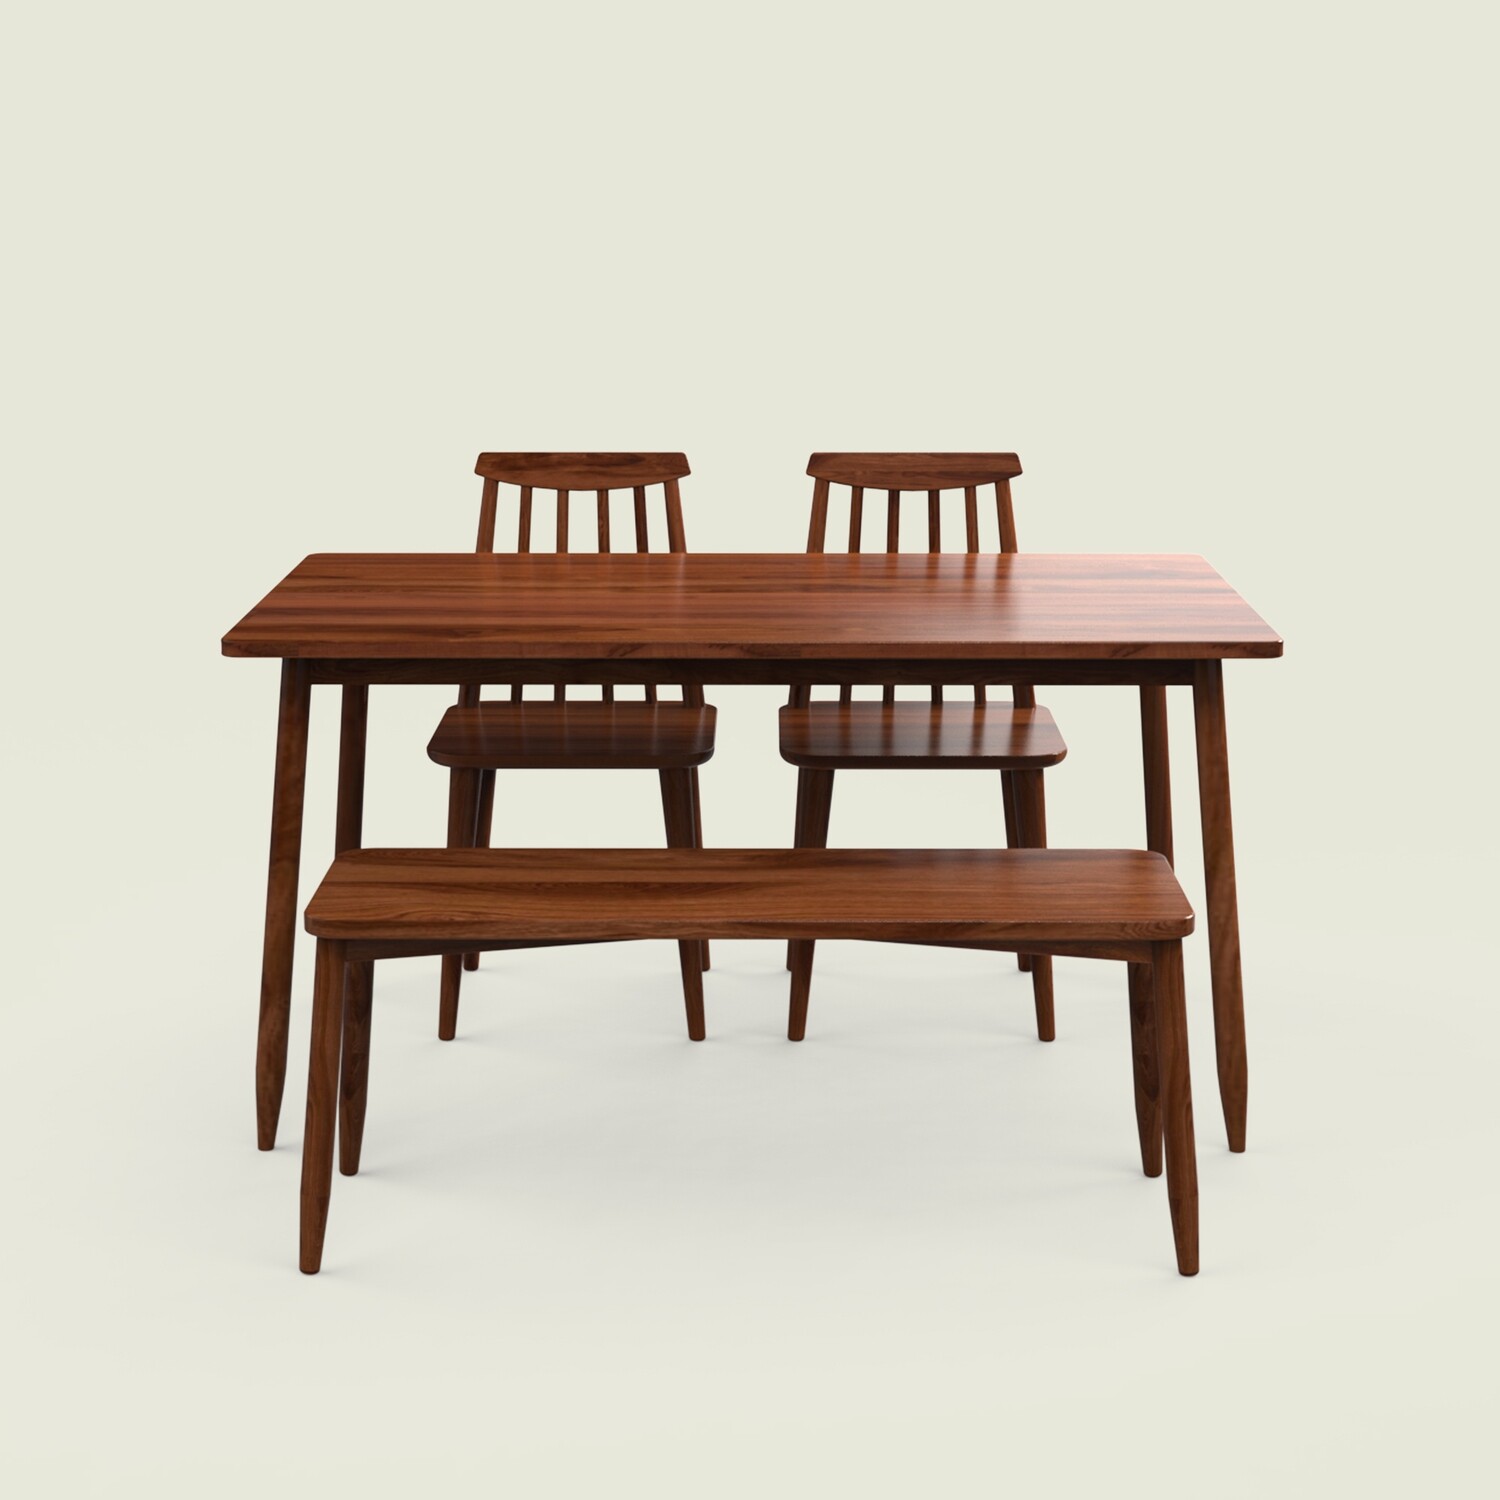 Maltby Dining Table Set - 4 & 6 Seater/150 cm with Bench